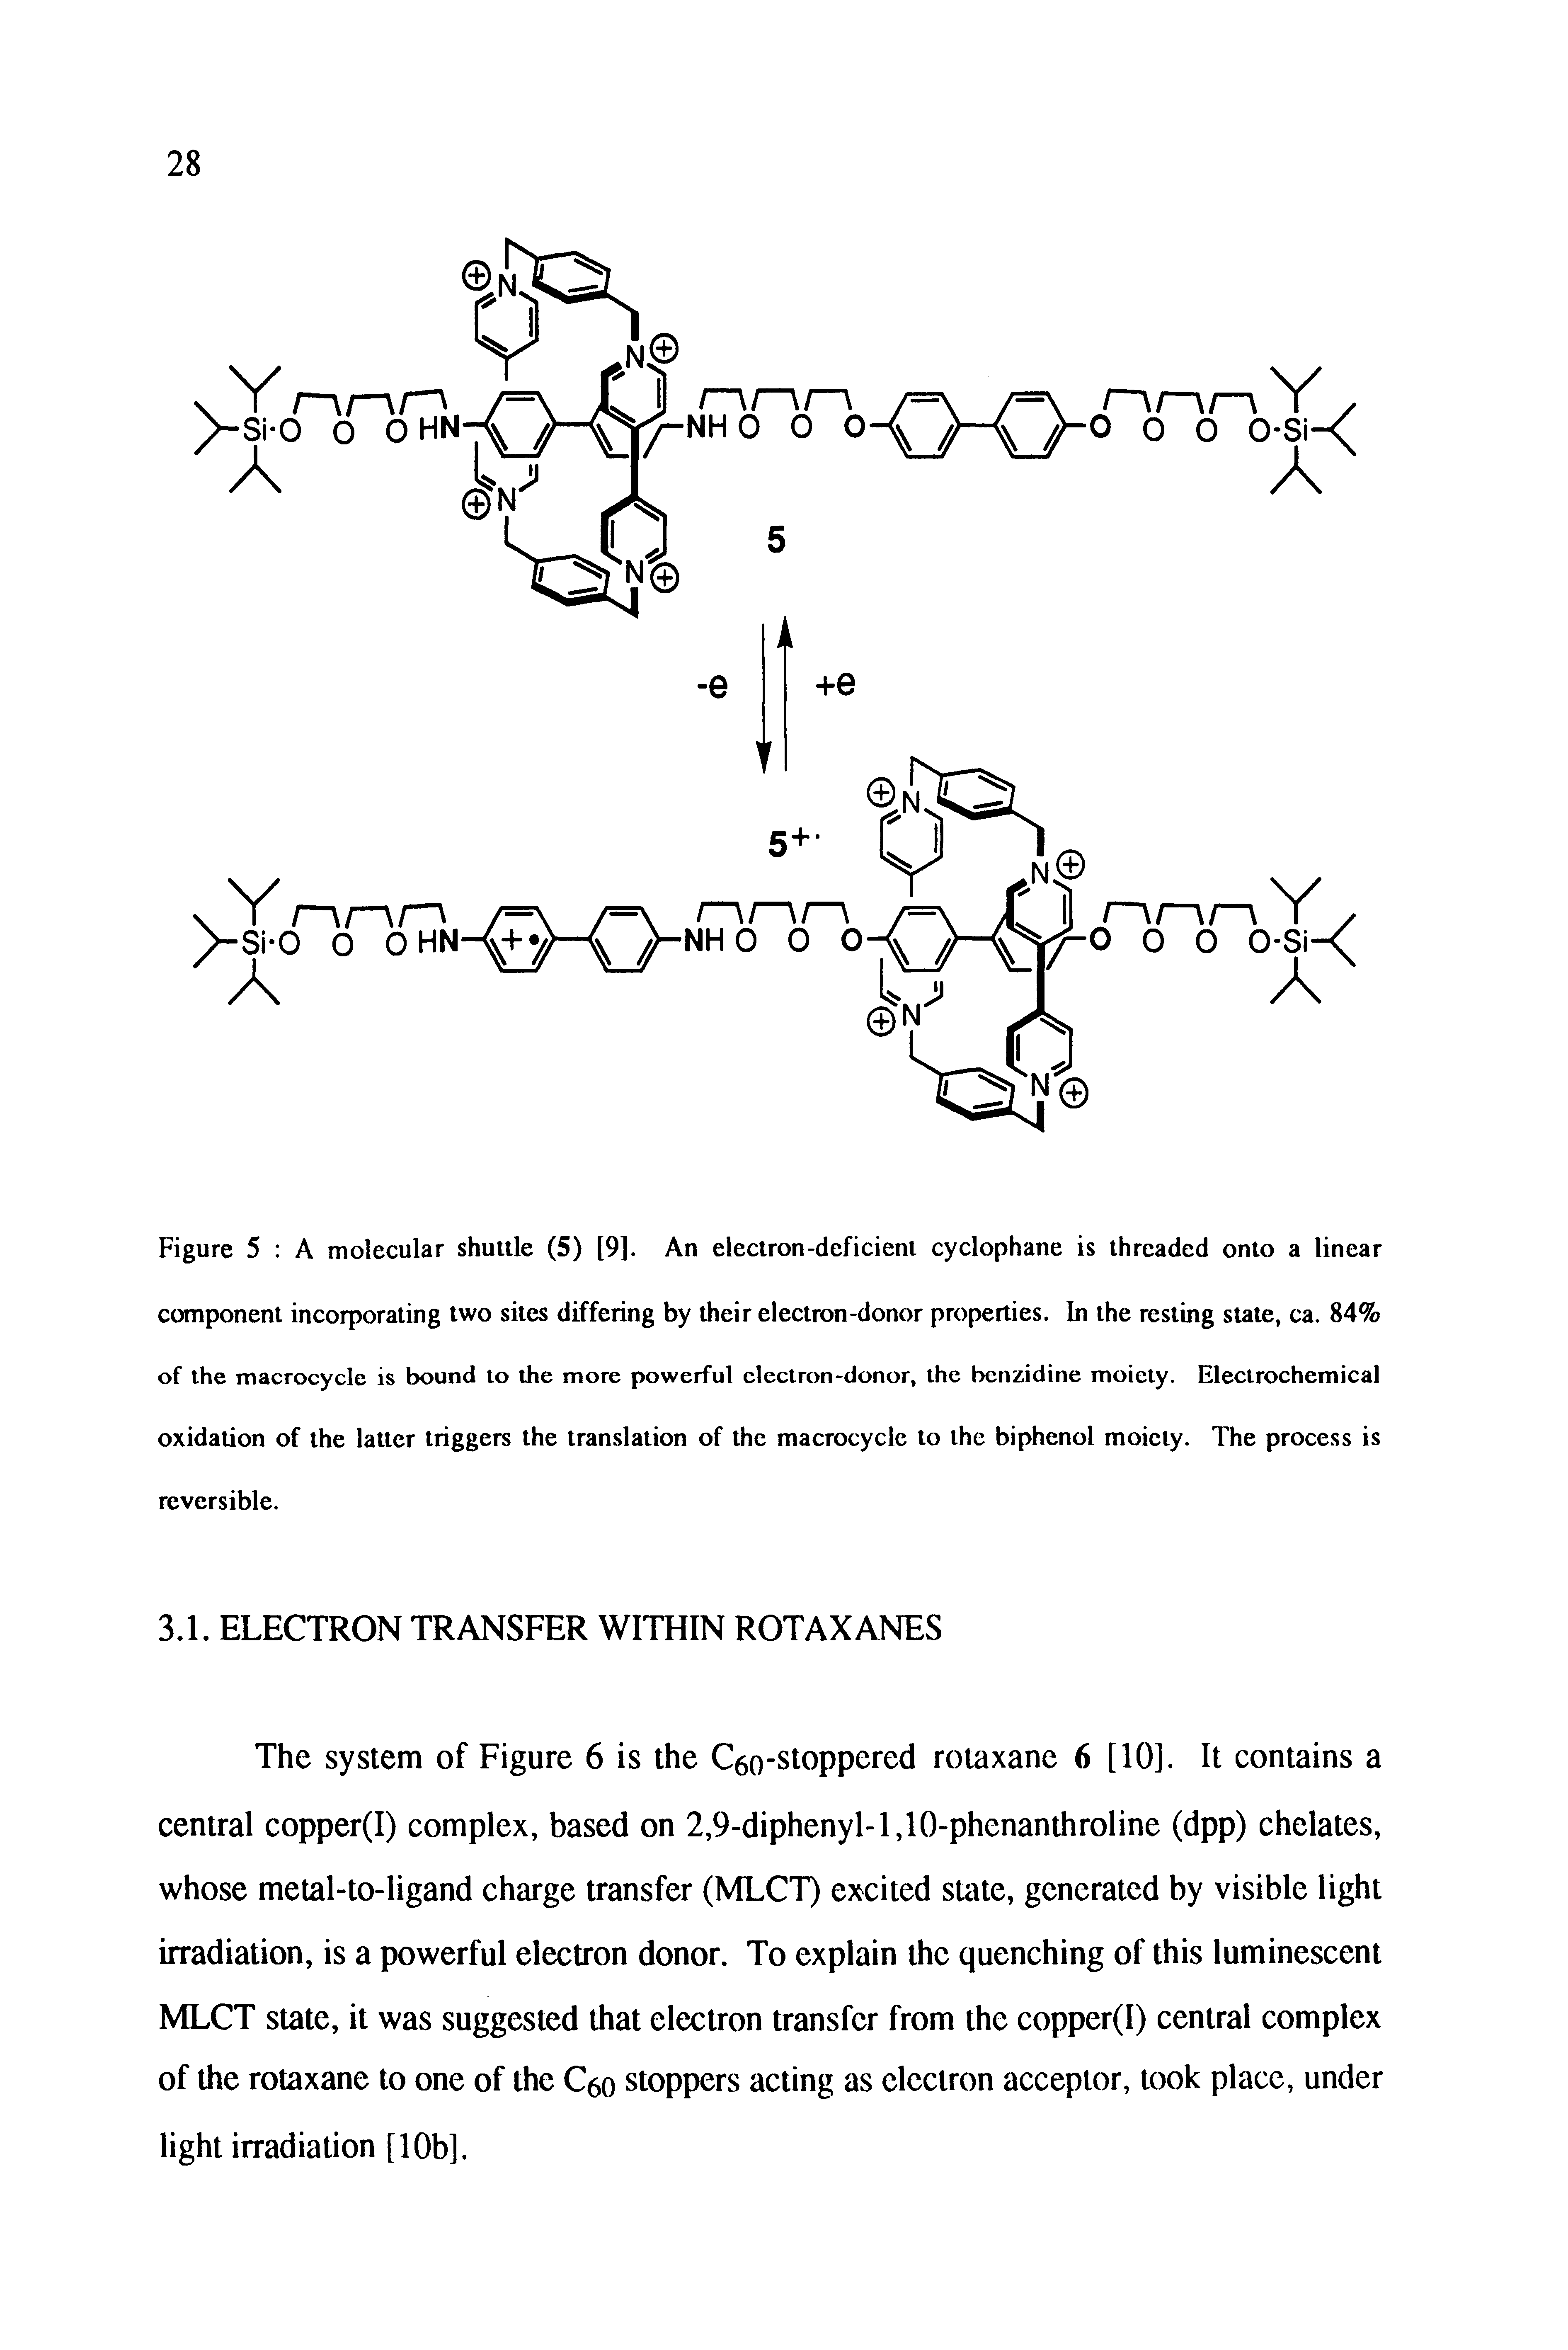 Figure 5 A molecular shuttle (5) [9]. An electron-deficient cyclophane is threaded onto a linear component incorporating two sites differing by their electron-donor properties. In the resting state, ca. 84% of the macrocycle is bound to the more powerful clcctron-donor, the benzidine moiety. Electrochemical oxidation of the latter triggers the translation of the macrocycle to the biphenol moiety. The process is reversible.